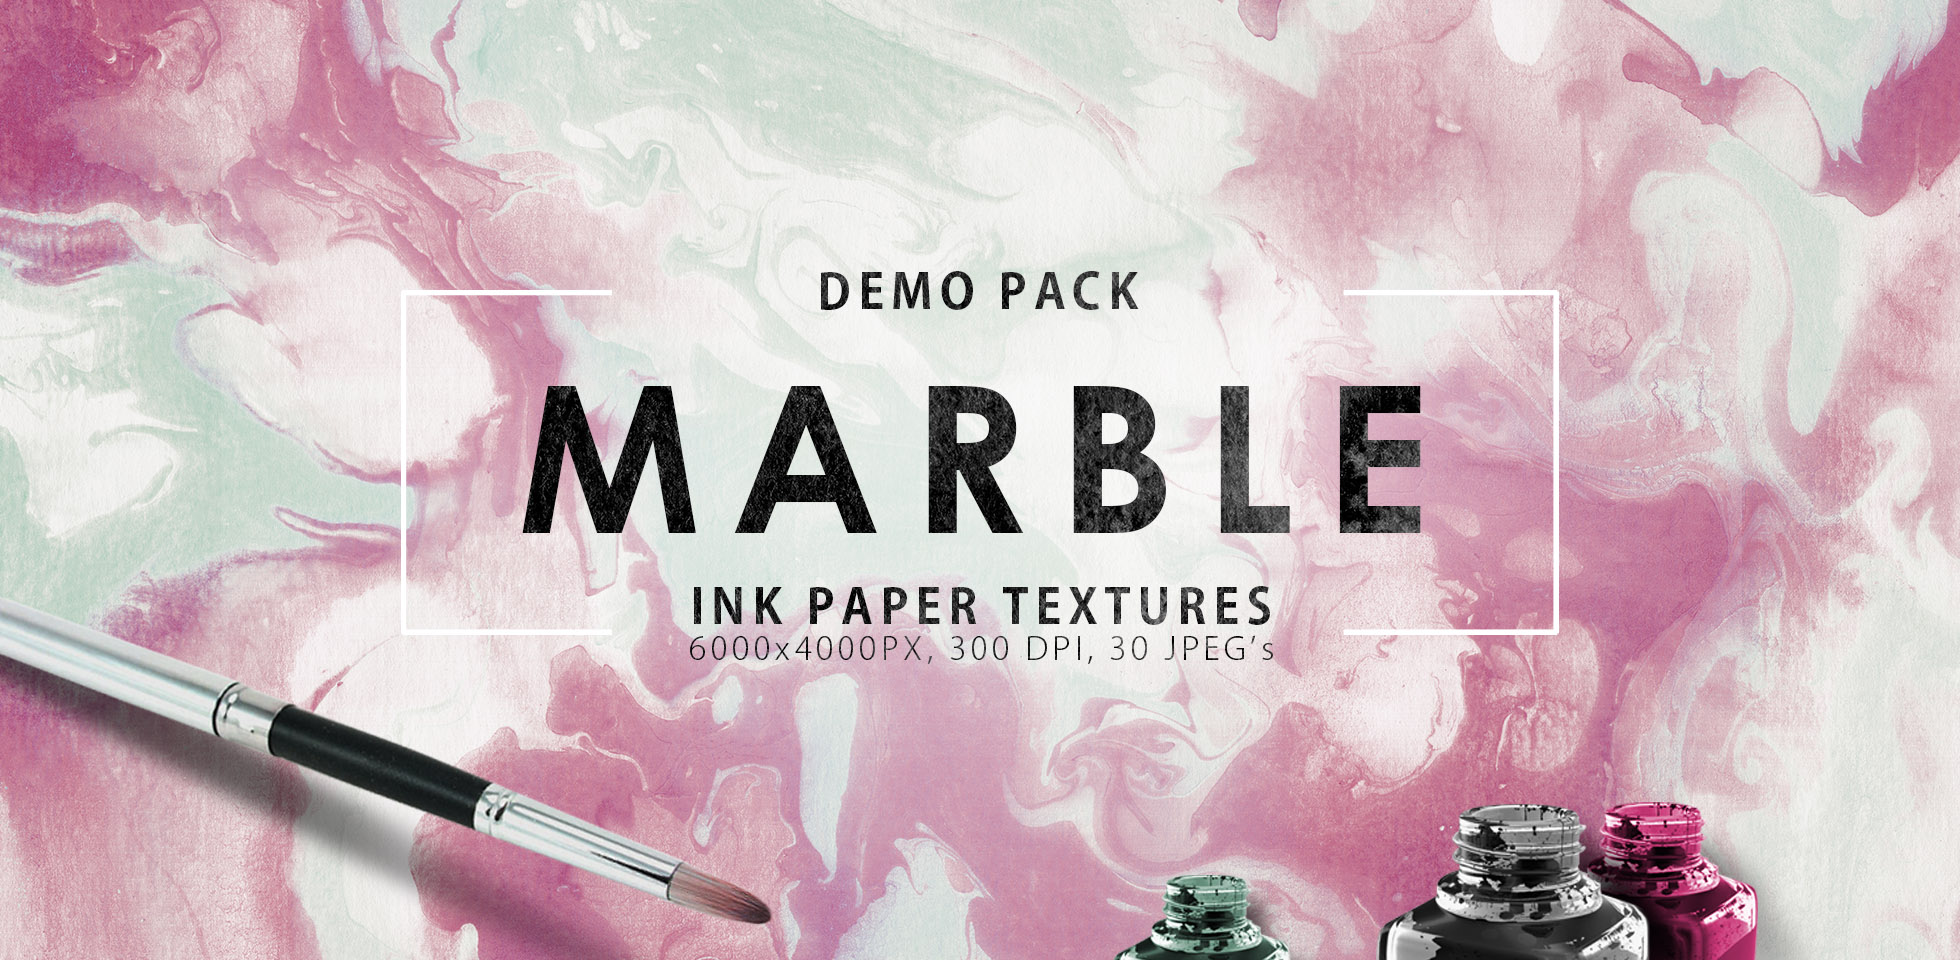 Free Download: Marble Ink Paper Textures